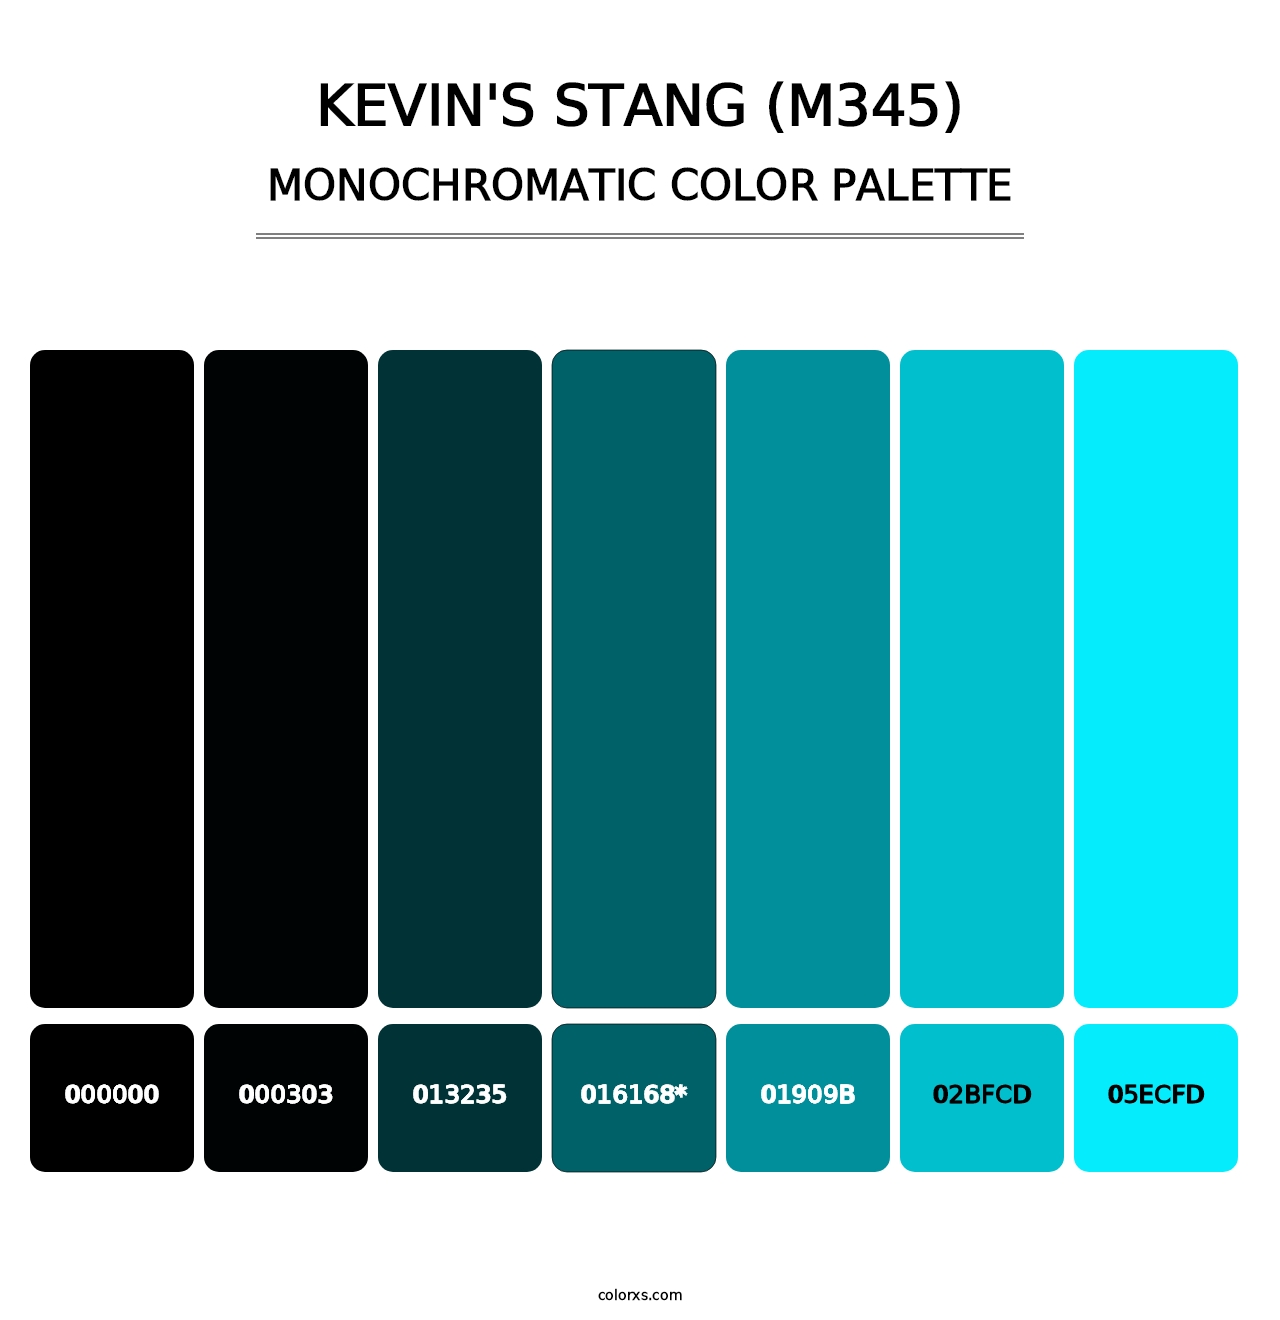 Kevin's Stang (M345) - Monochromatic Color Palette